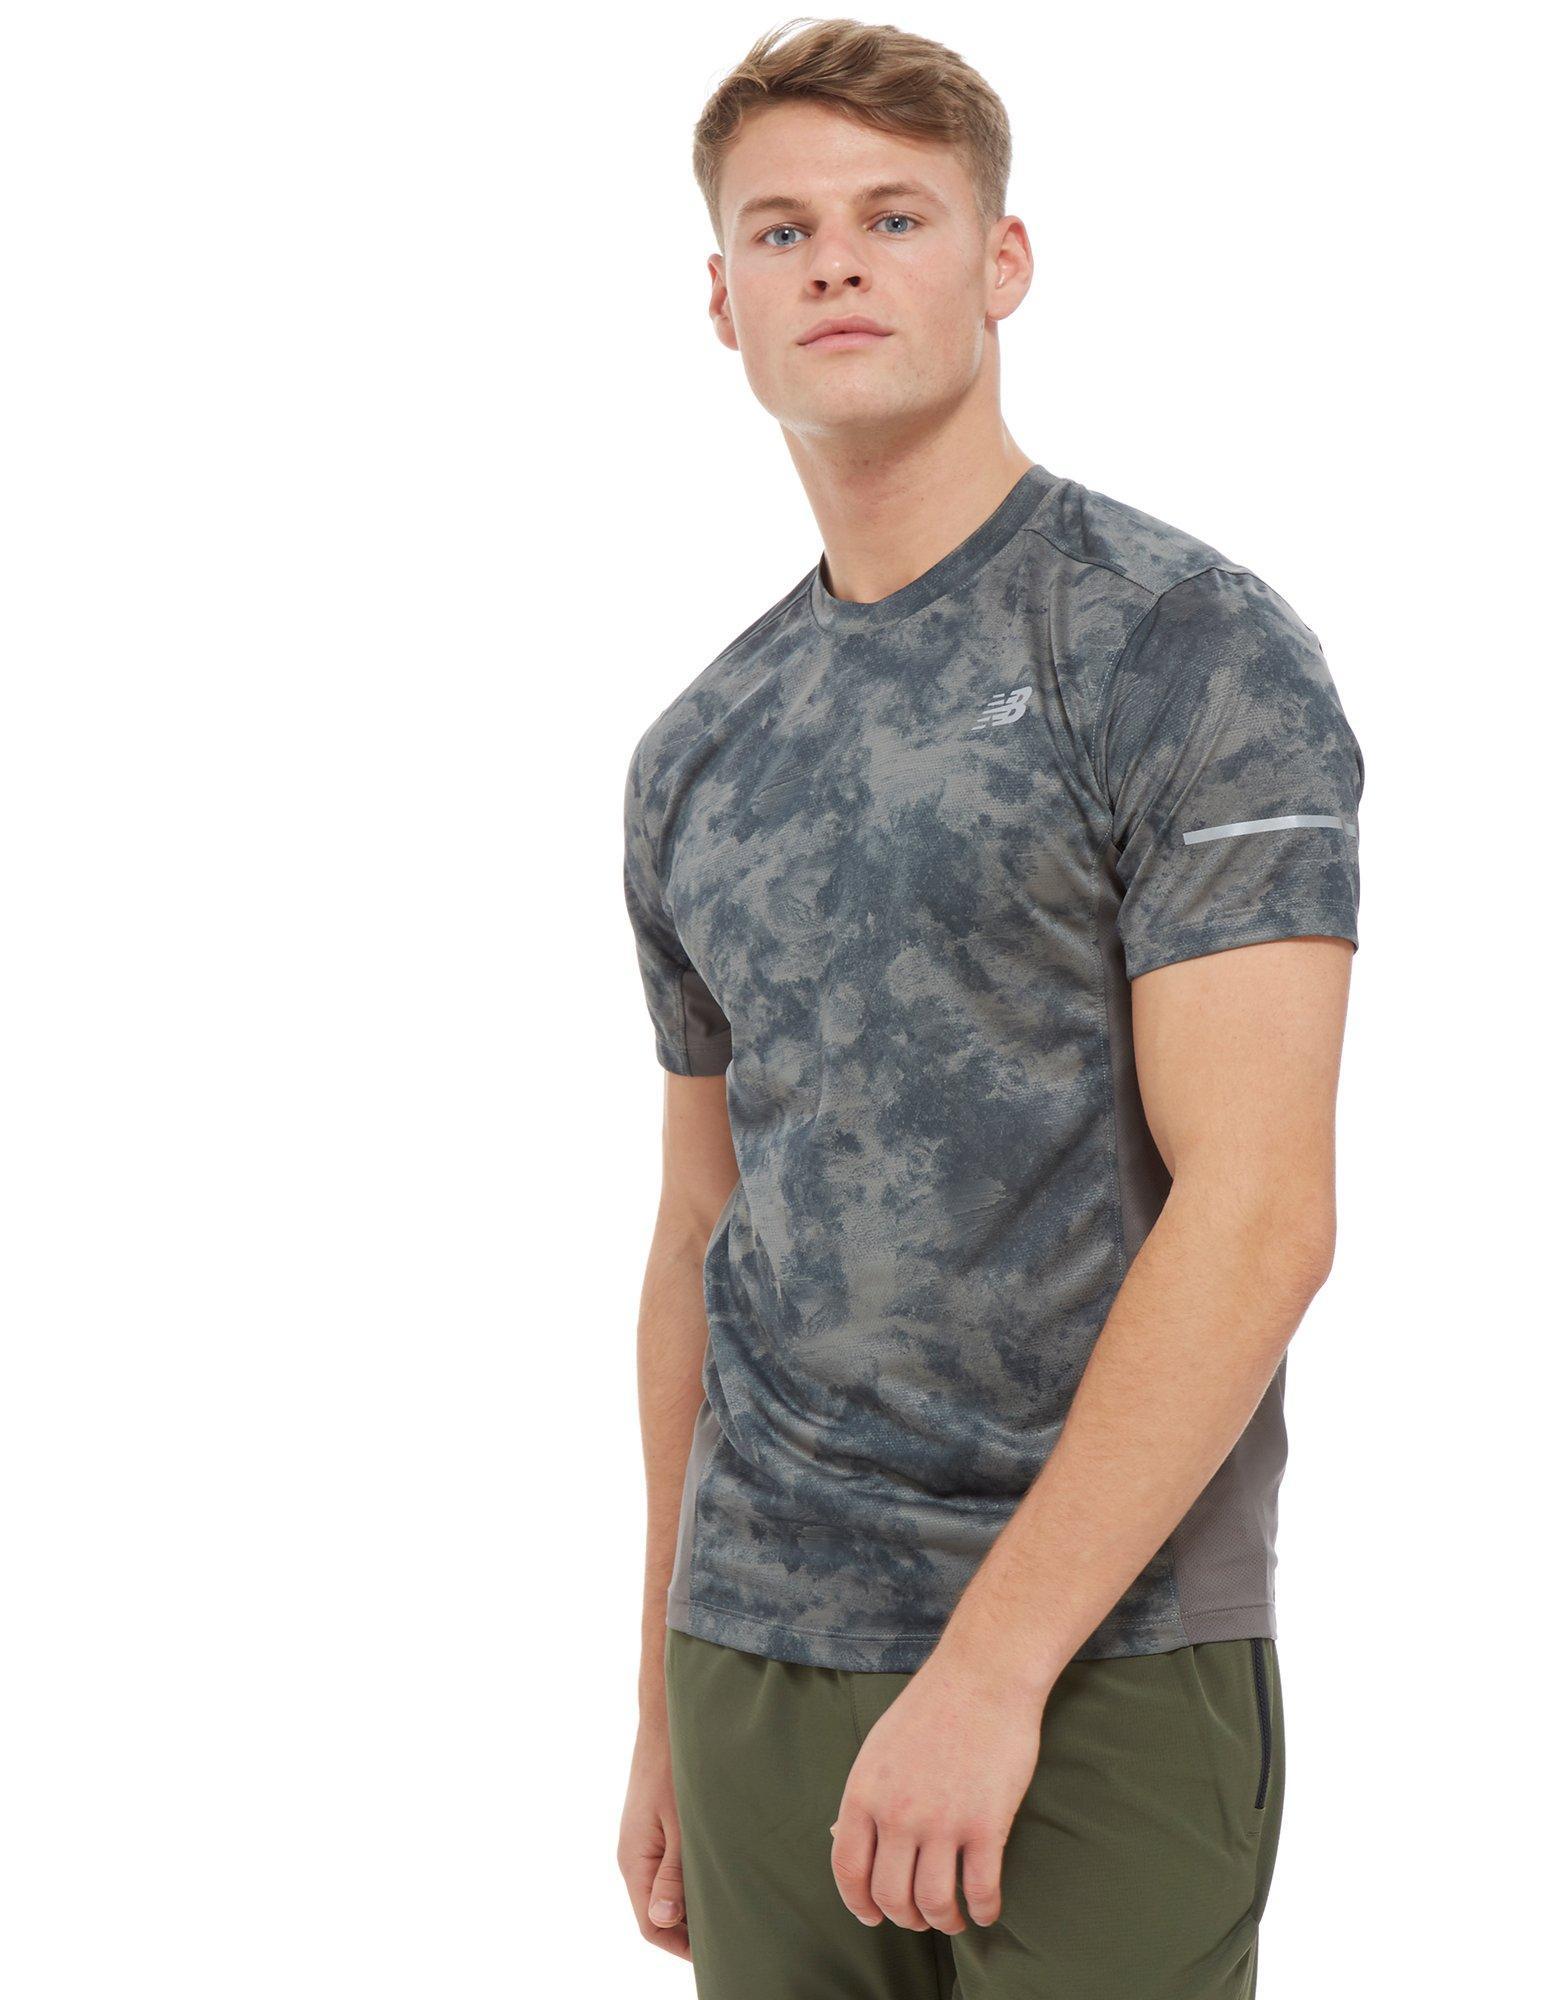 New Balance Synthetic Camo T-shirt in Green for Men - Lyst